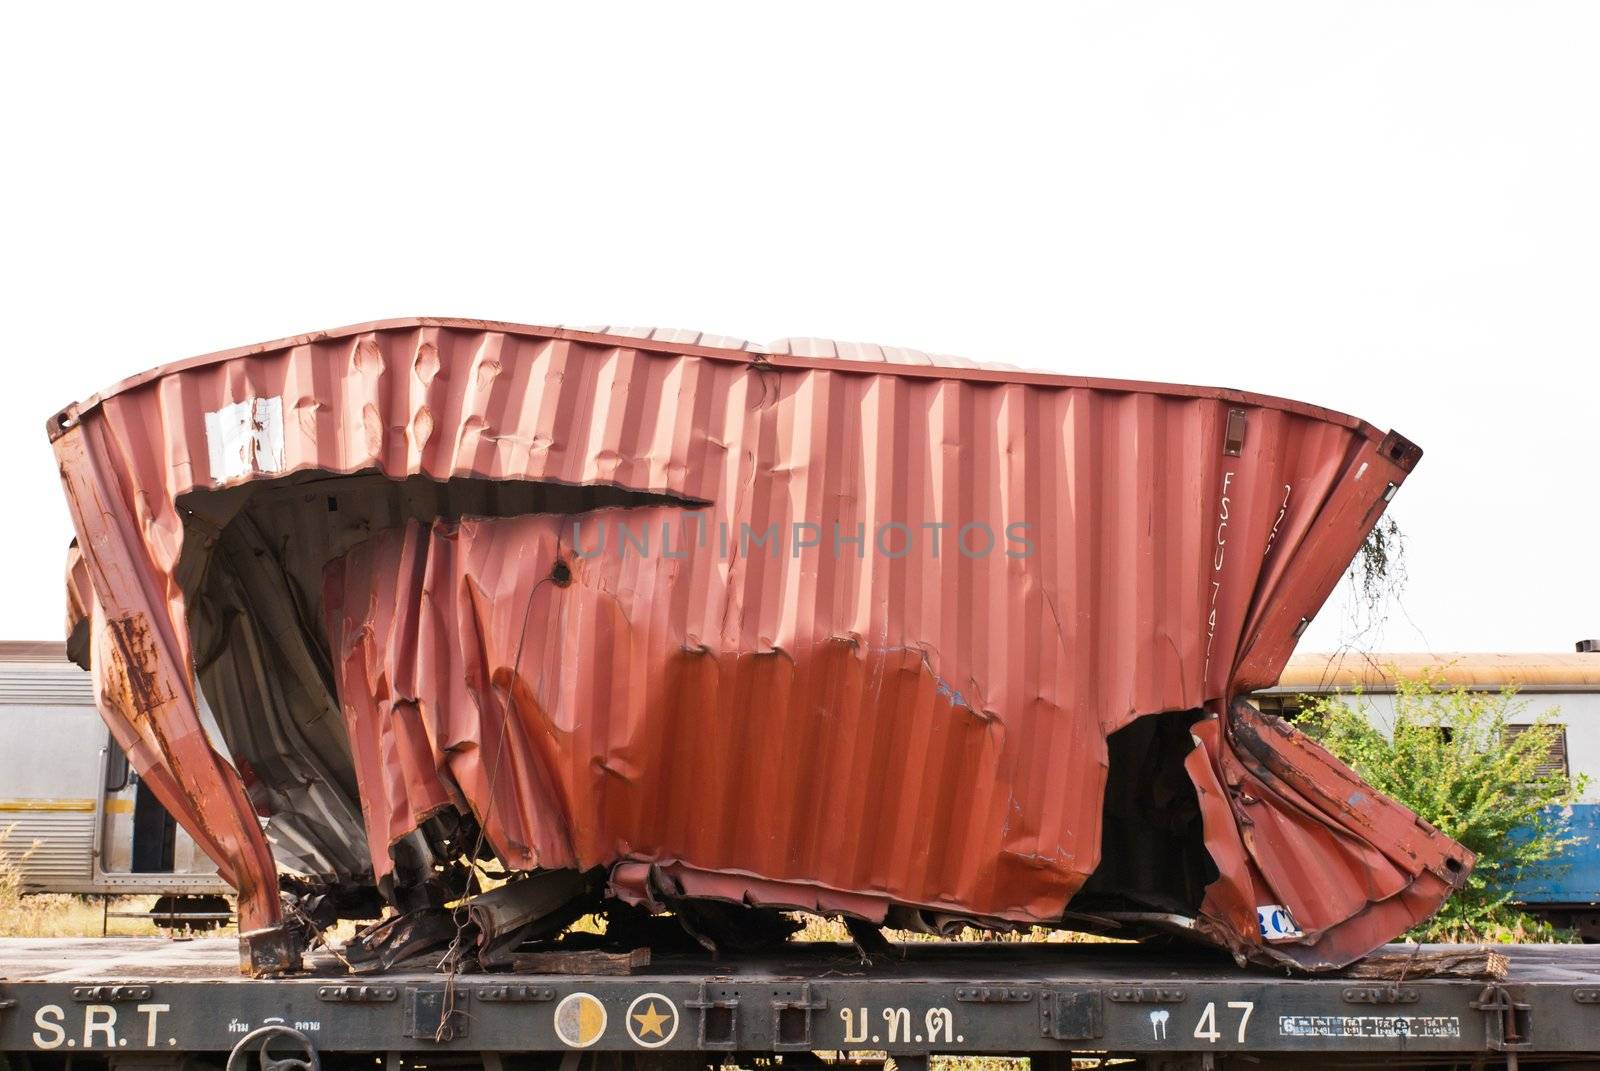 A wrackage of steel container taken from train yard
 by sasilsolutions